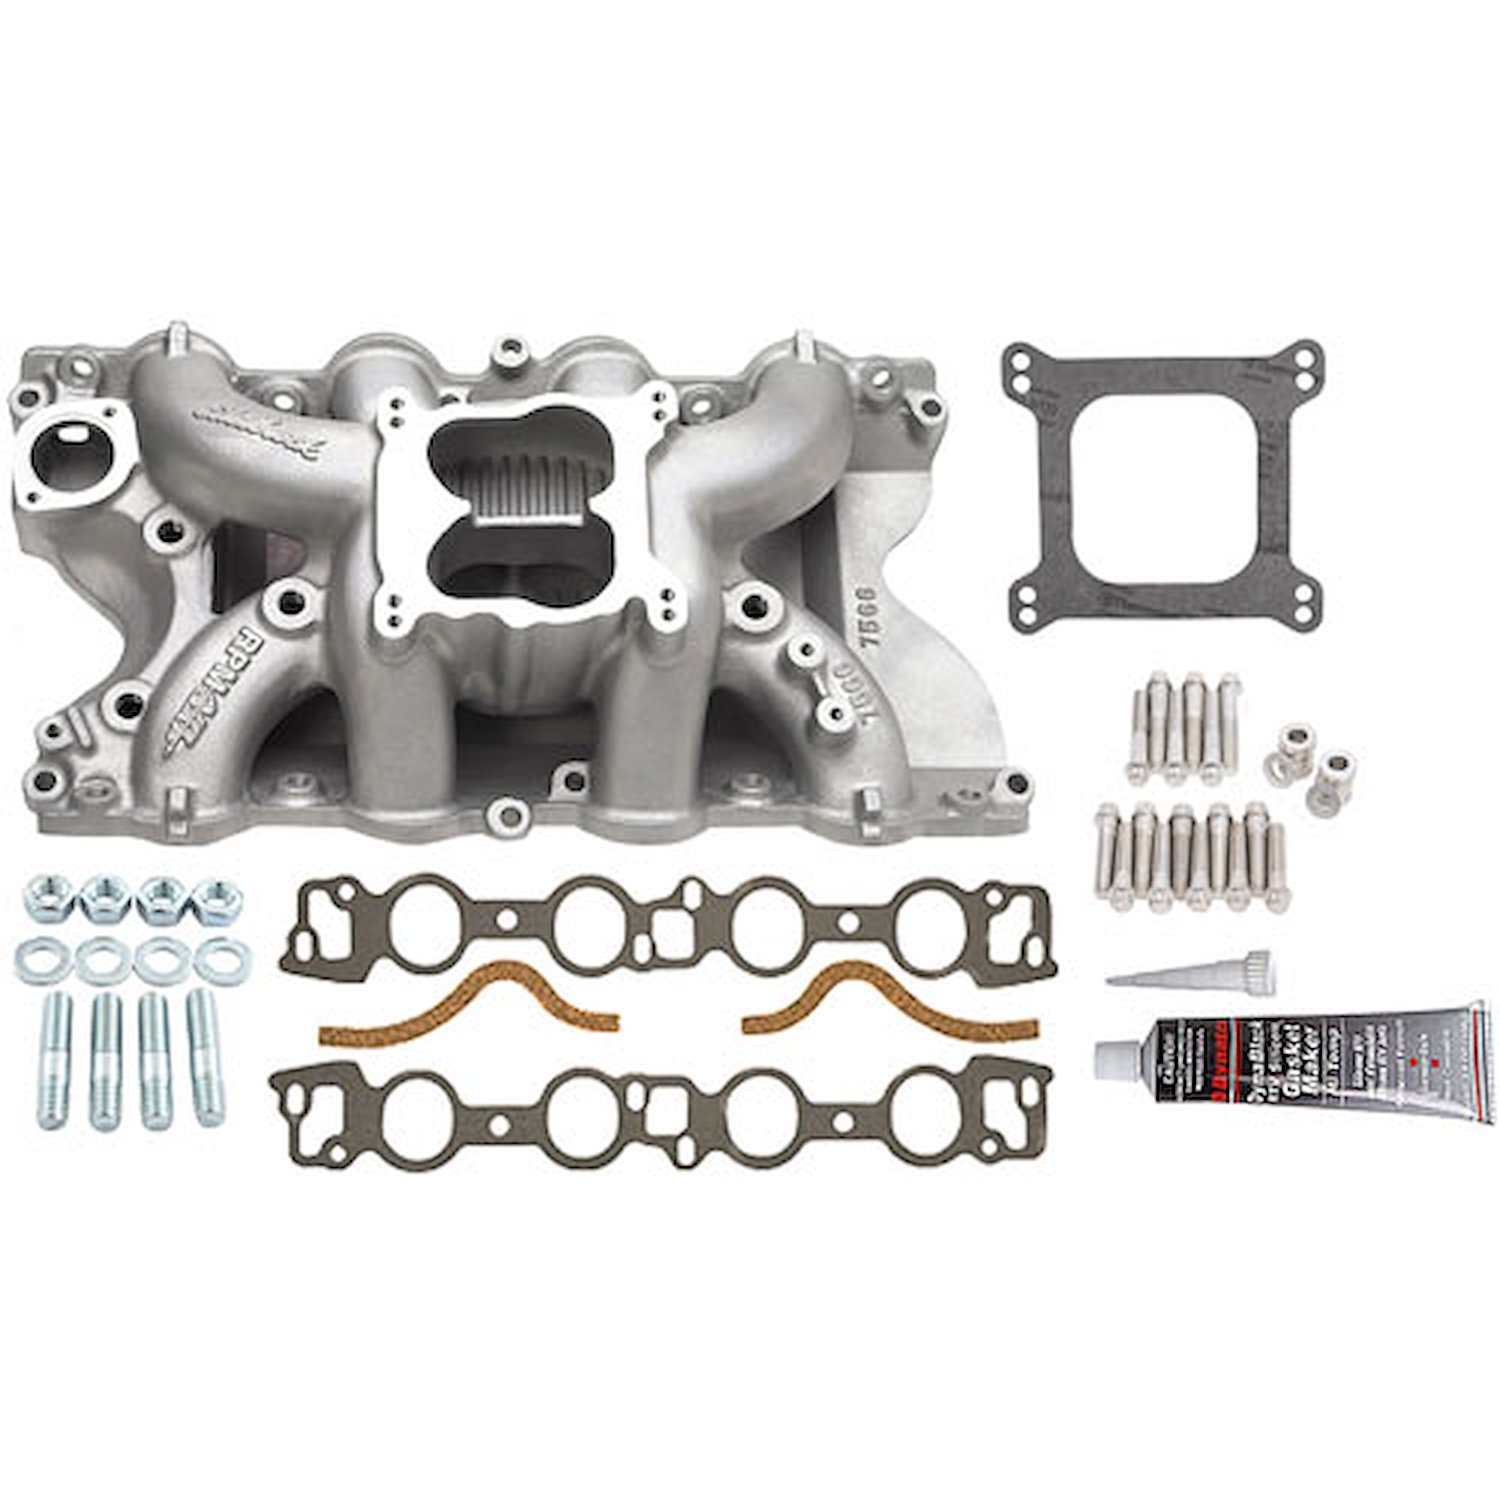 RPM Air-Gap 460 Ford Intake Manifold with Installation Kit